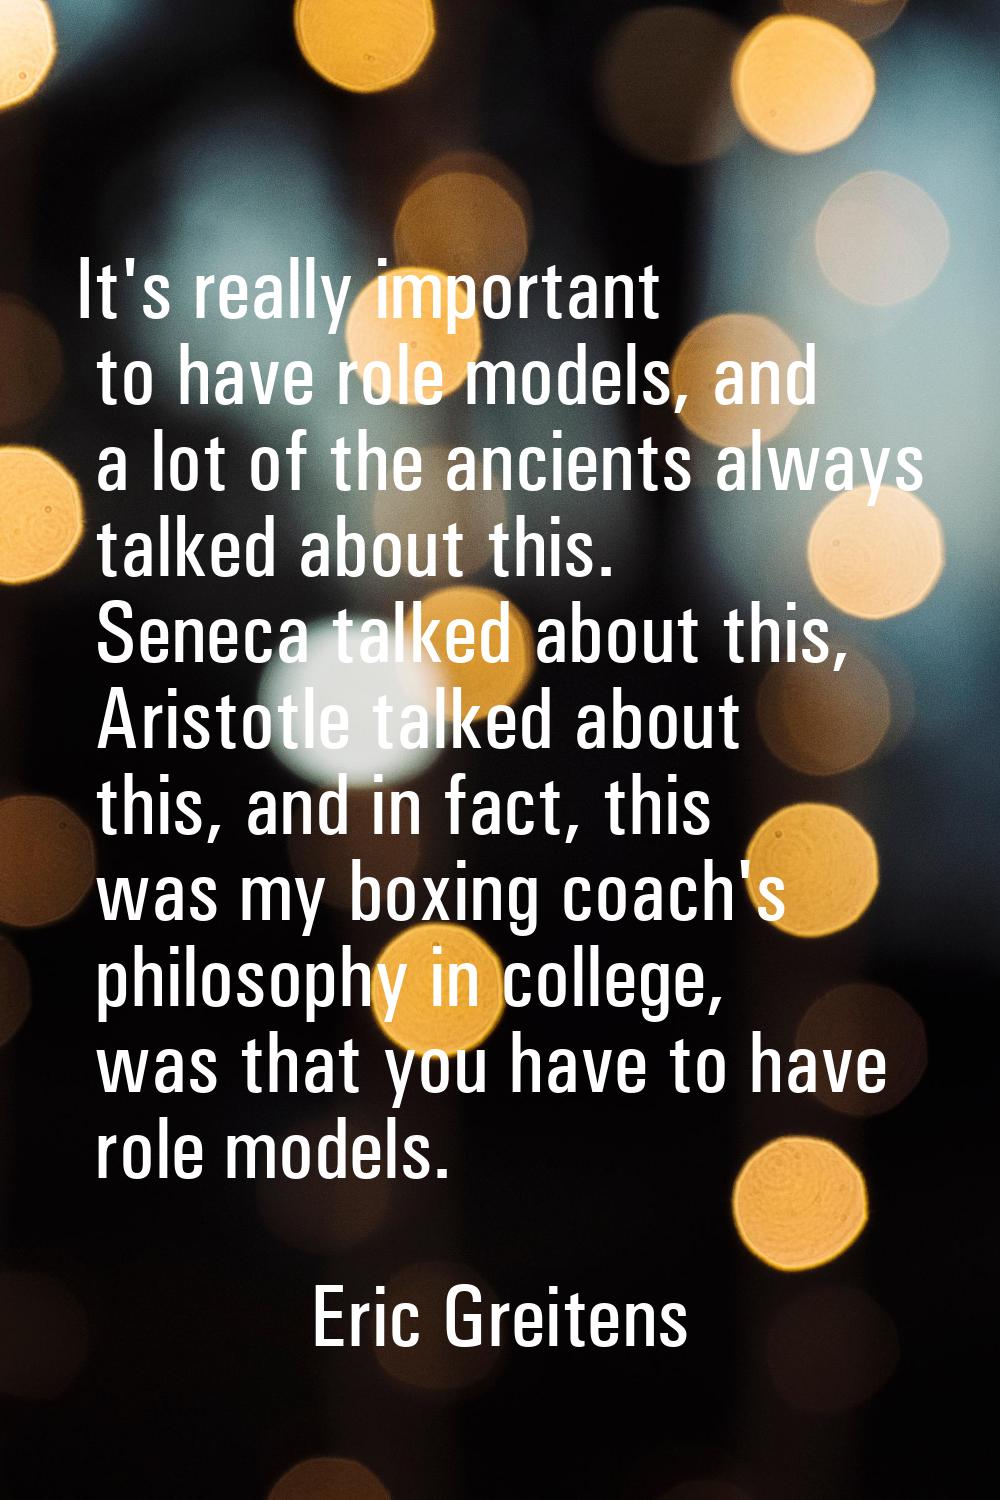 It's really important to have role models, and a lot of the ancients always talked about this. Sene